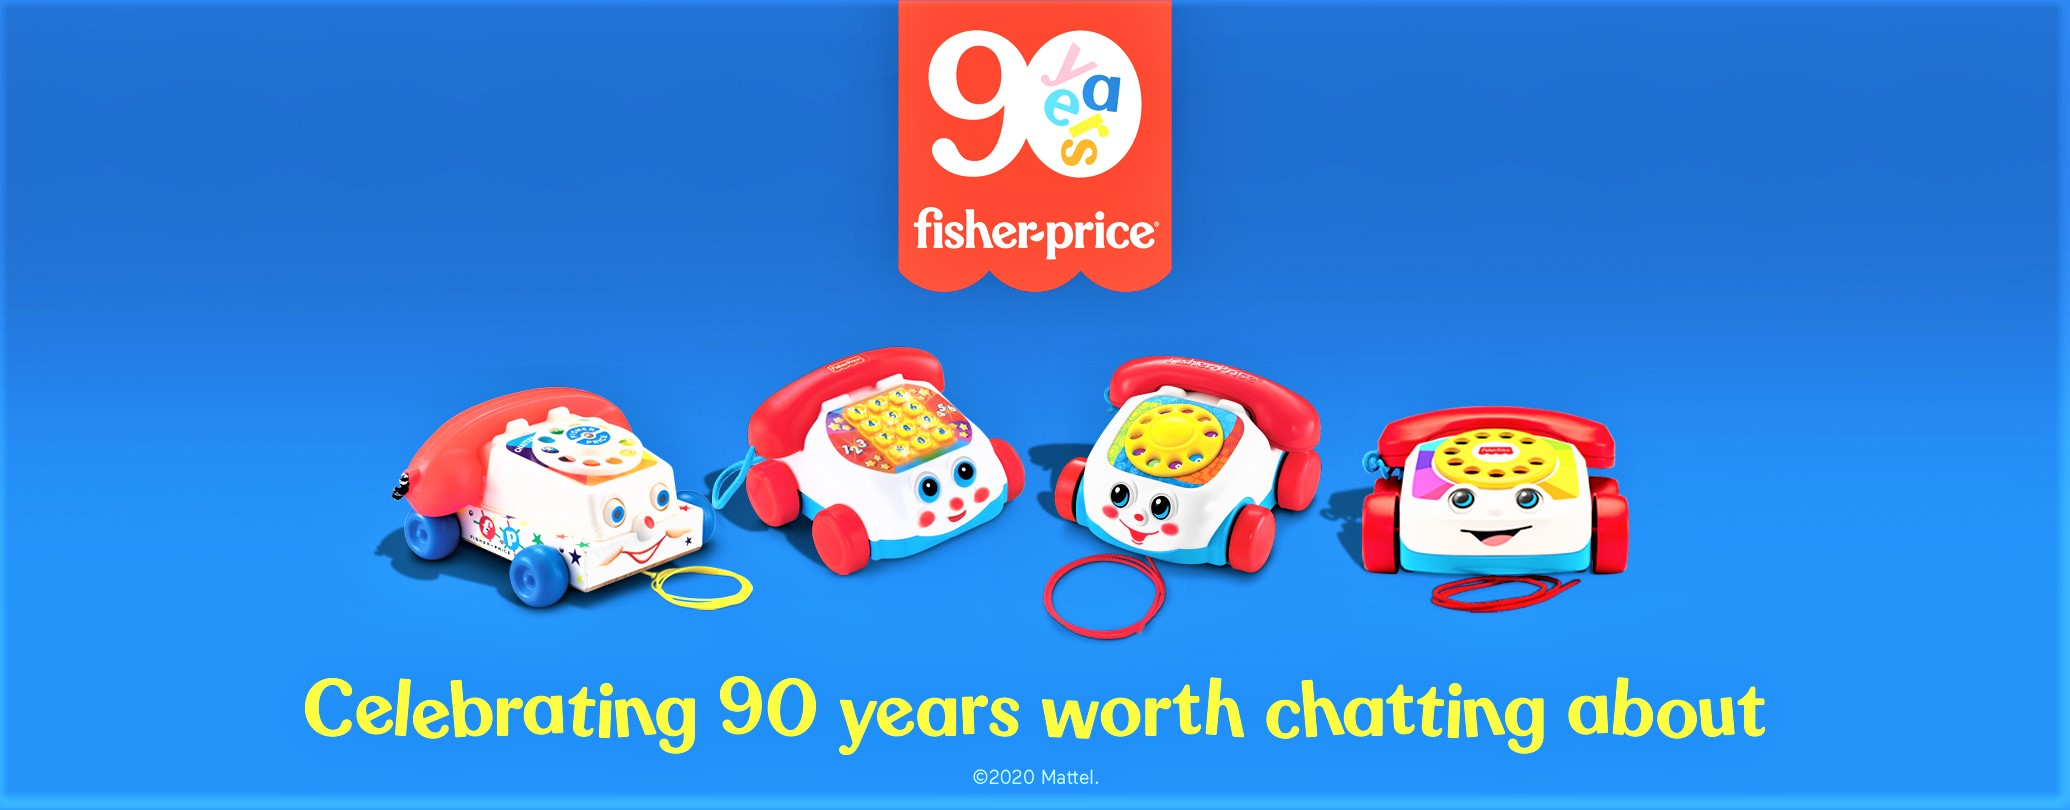 Fisher-Price compleanno